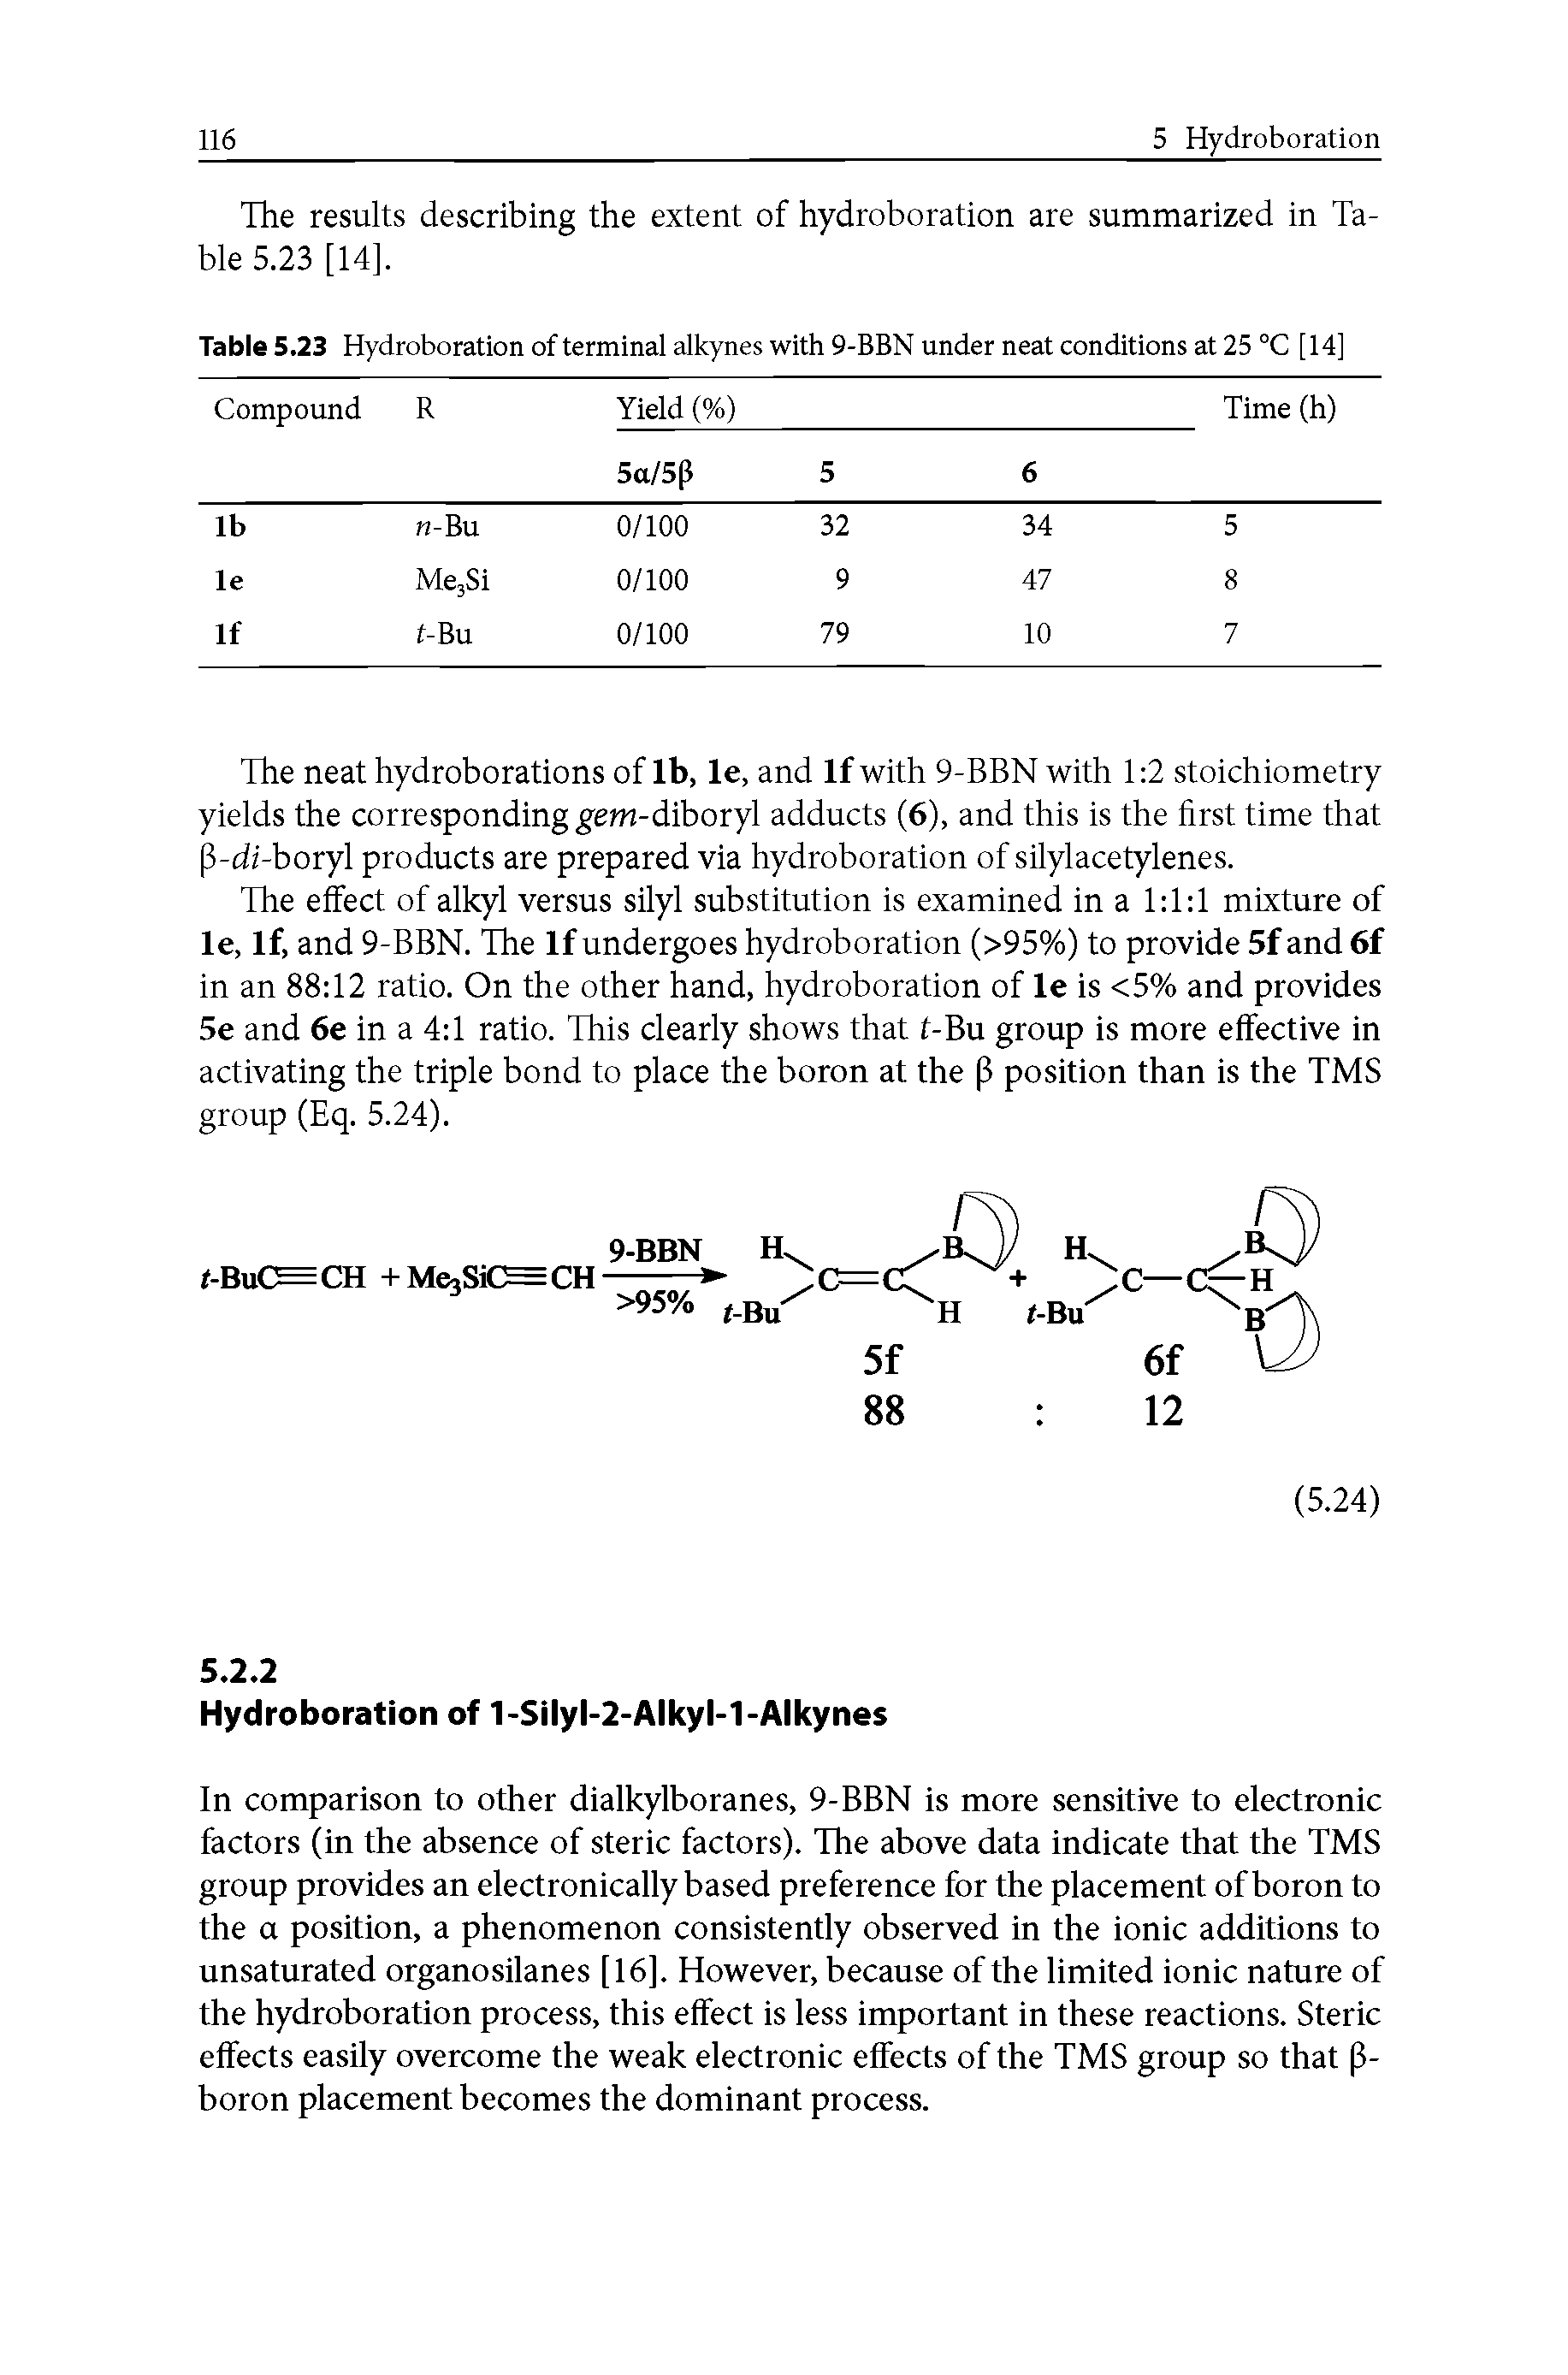 Table 5.23 Hydroboration of terminal alkynes with 9-BBN under neat conditions at 25 °C [14]...